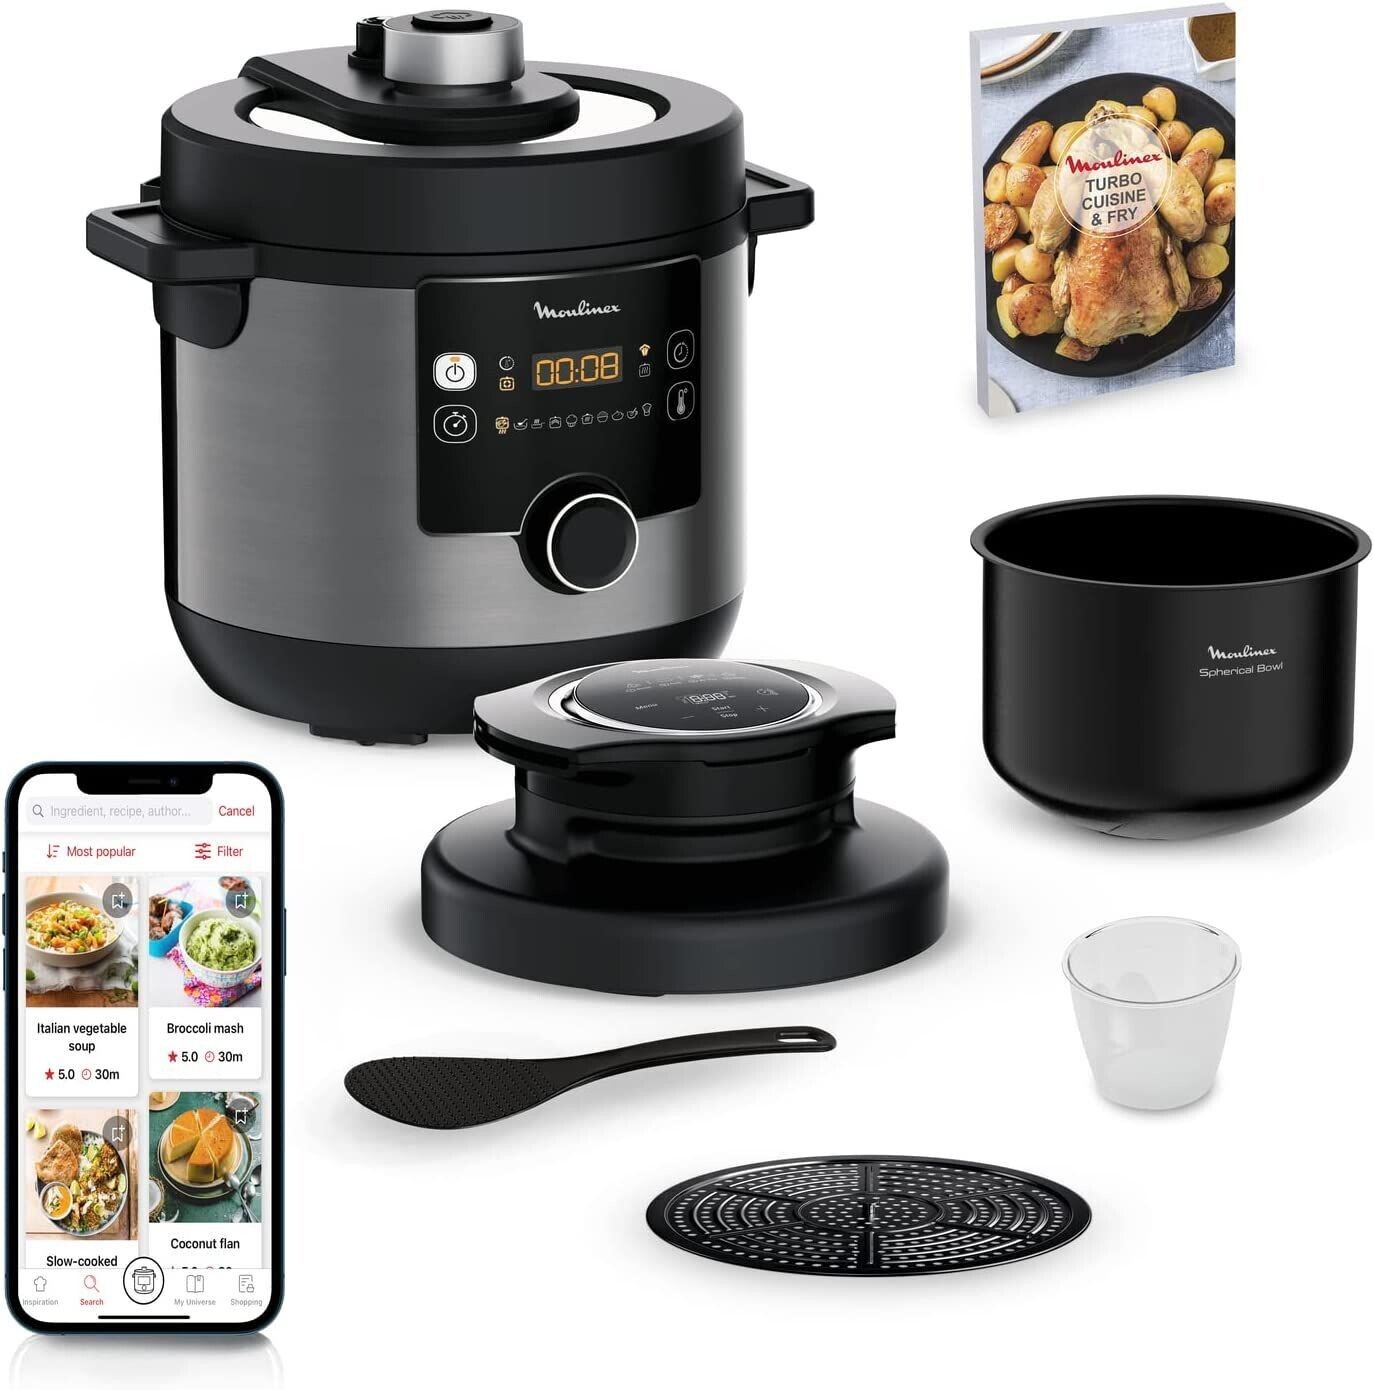 Moulinex Turbo Cuisine & fry CE7788 - 2 in 1: pentola a pressione